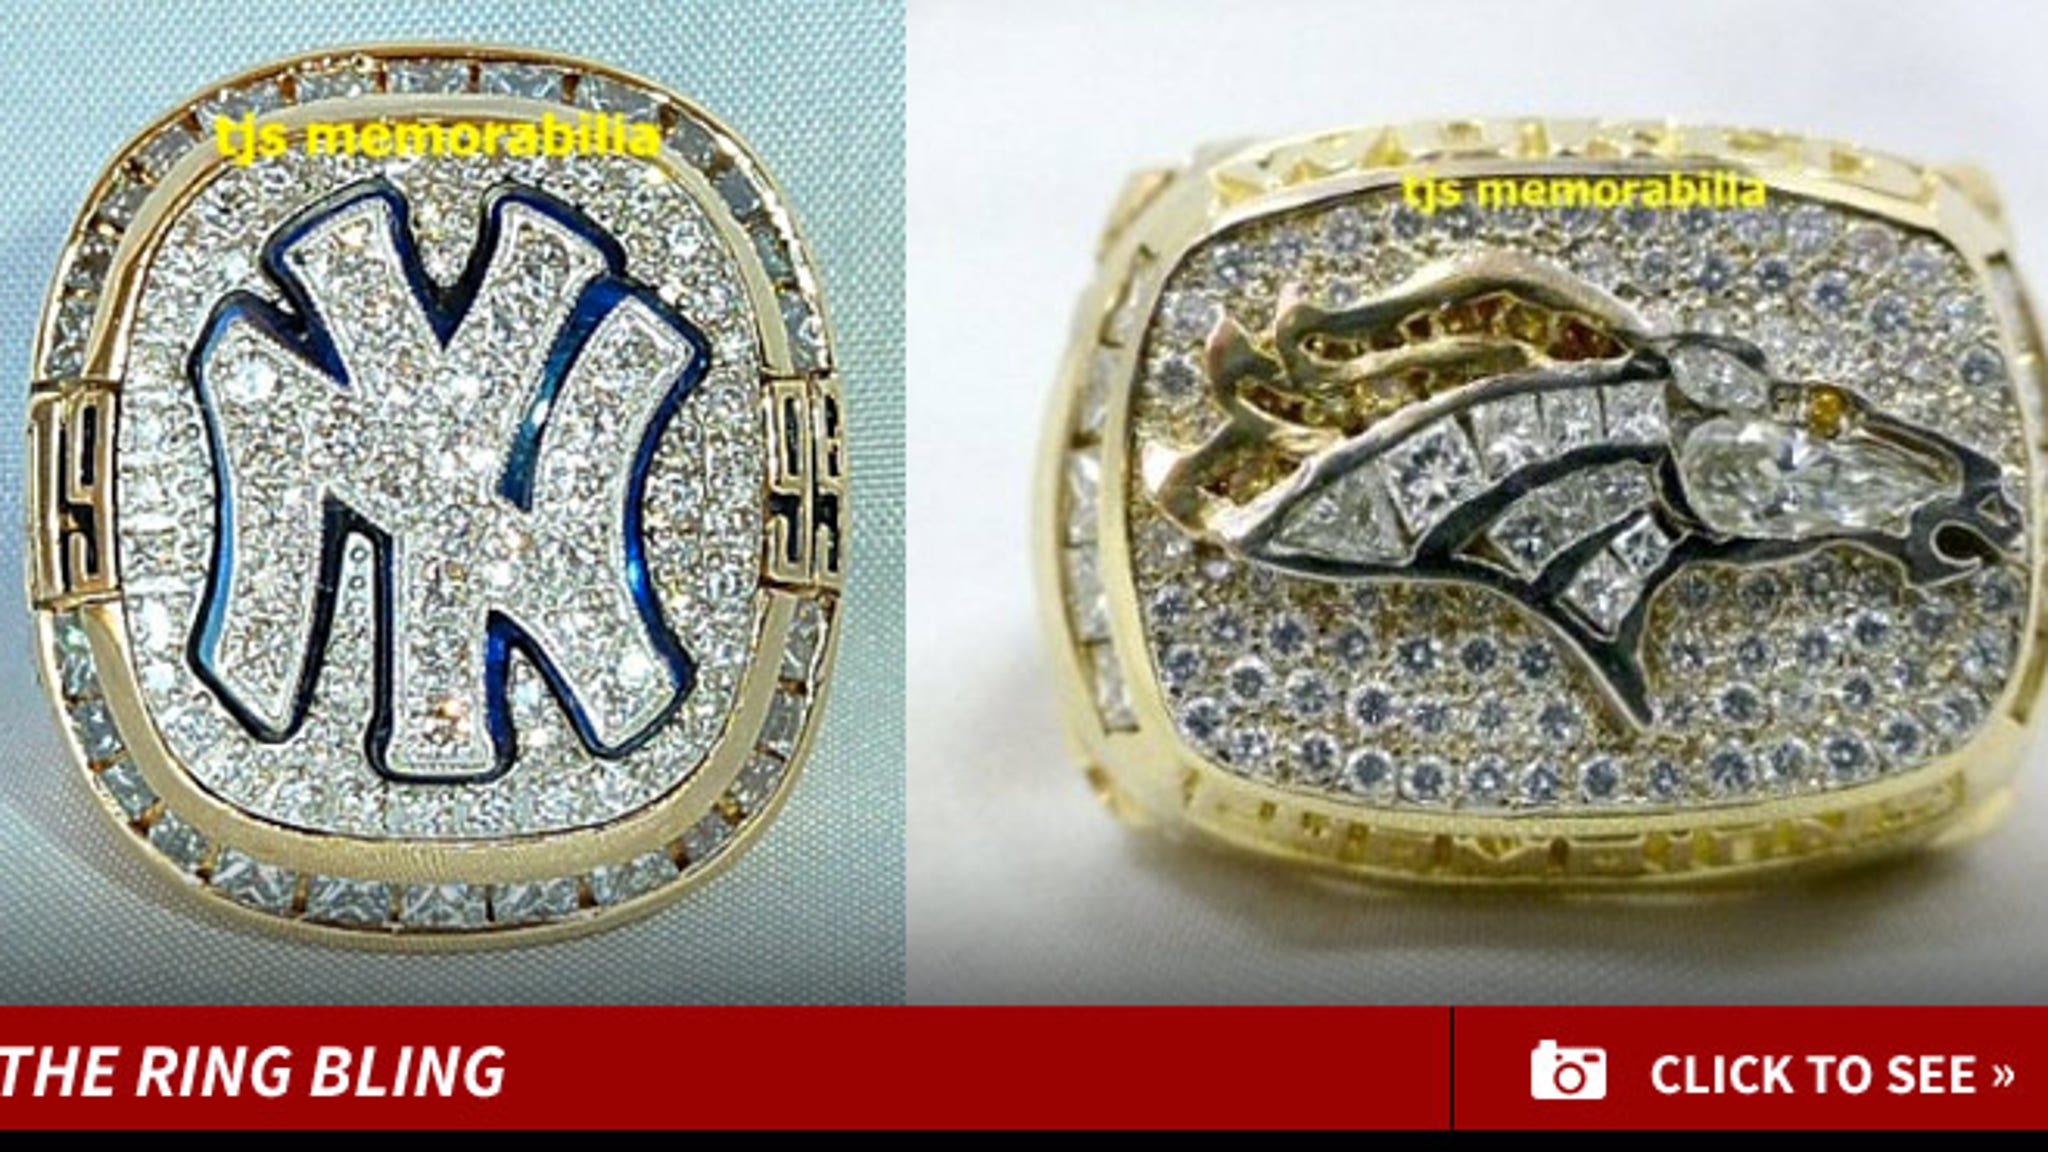 Championship Rings For Sale -- Anyone Got $30,000?